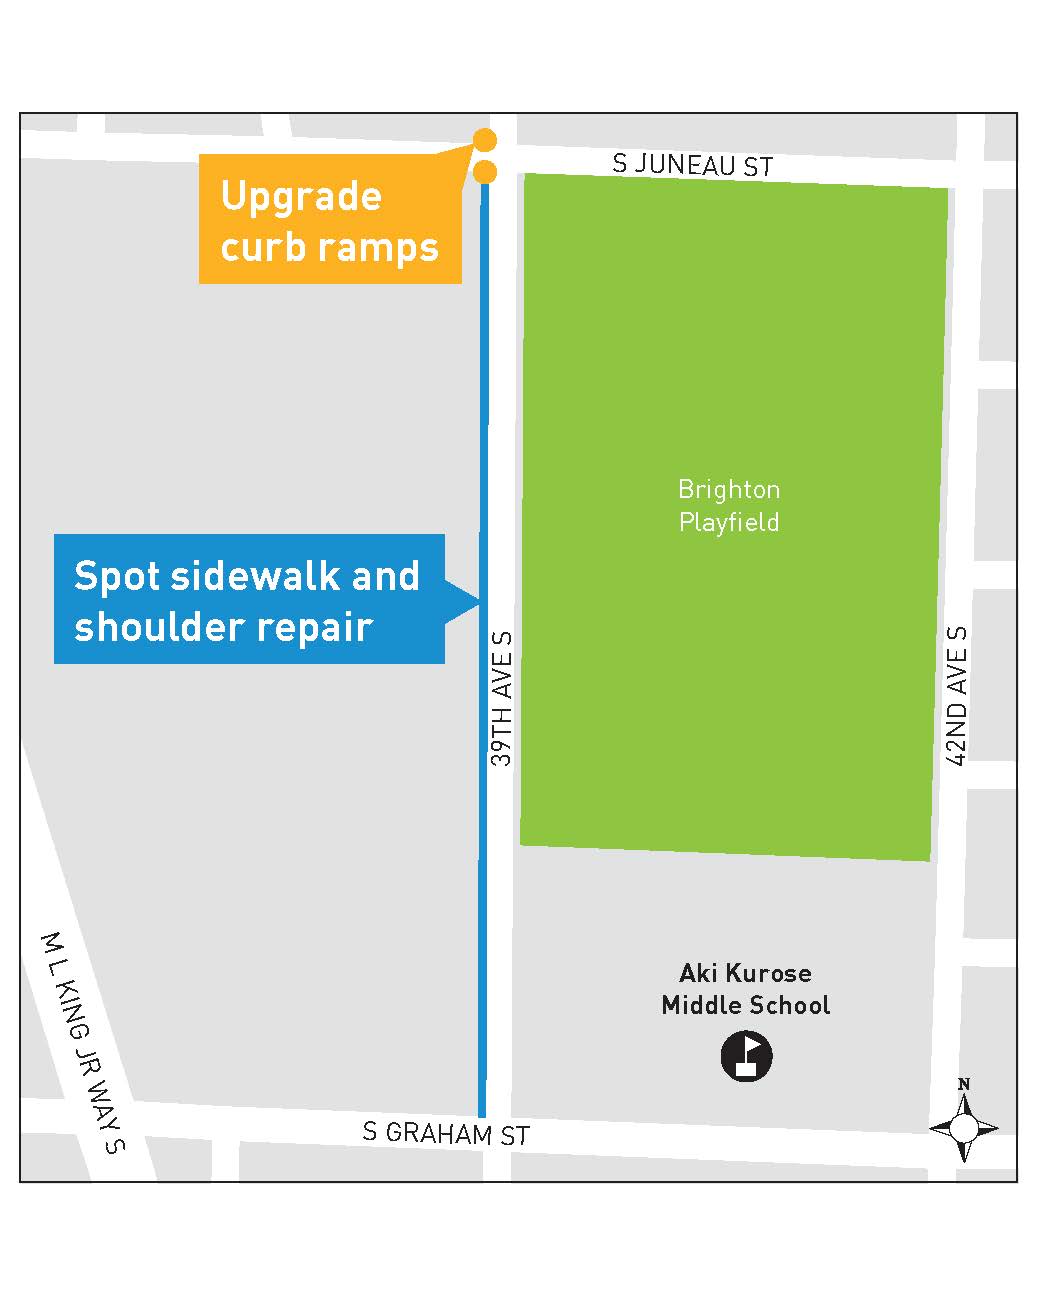 39th Ave S between S Juneau and S Graham St, street and walkway enhancements map